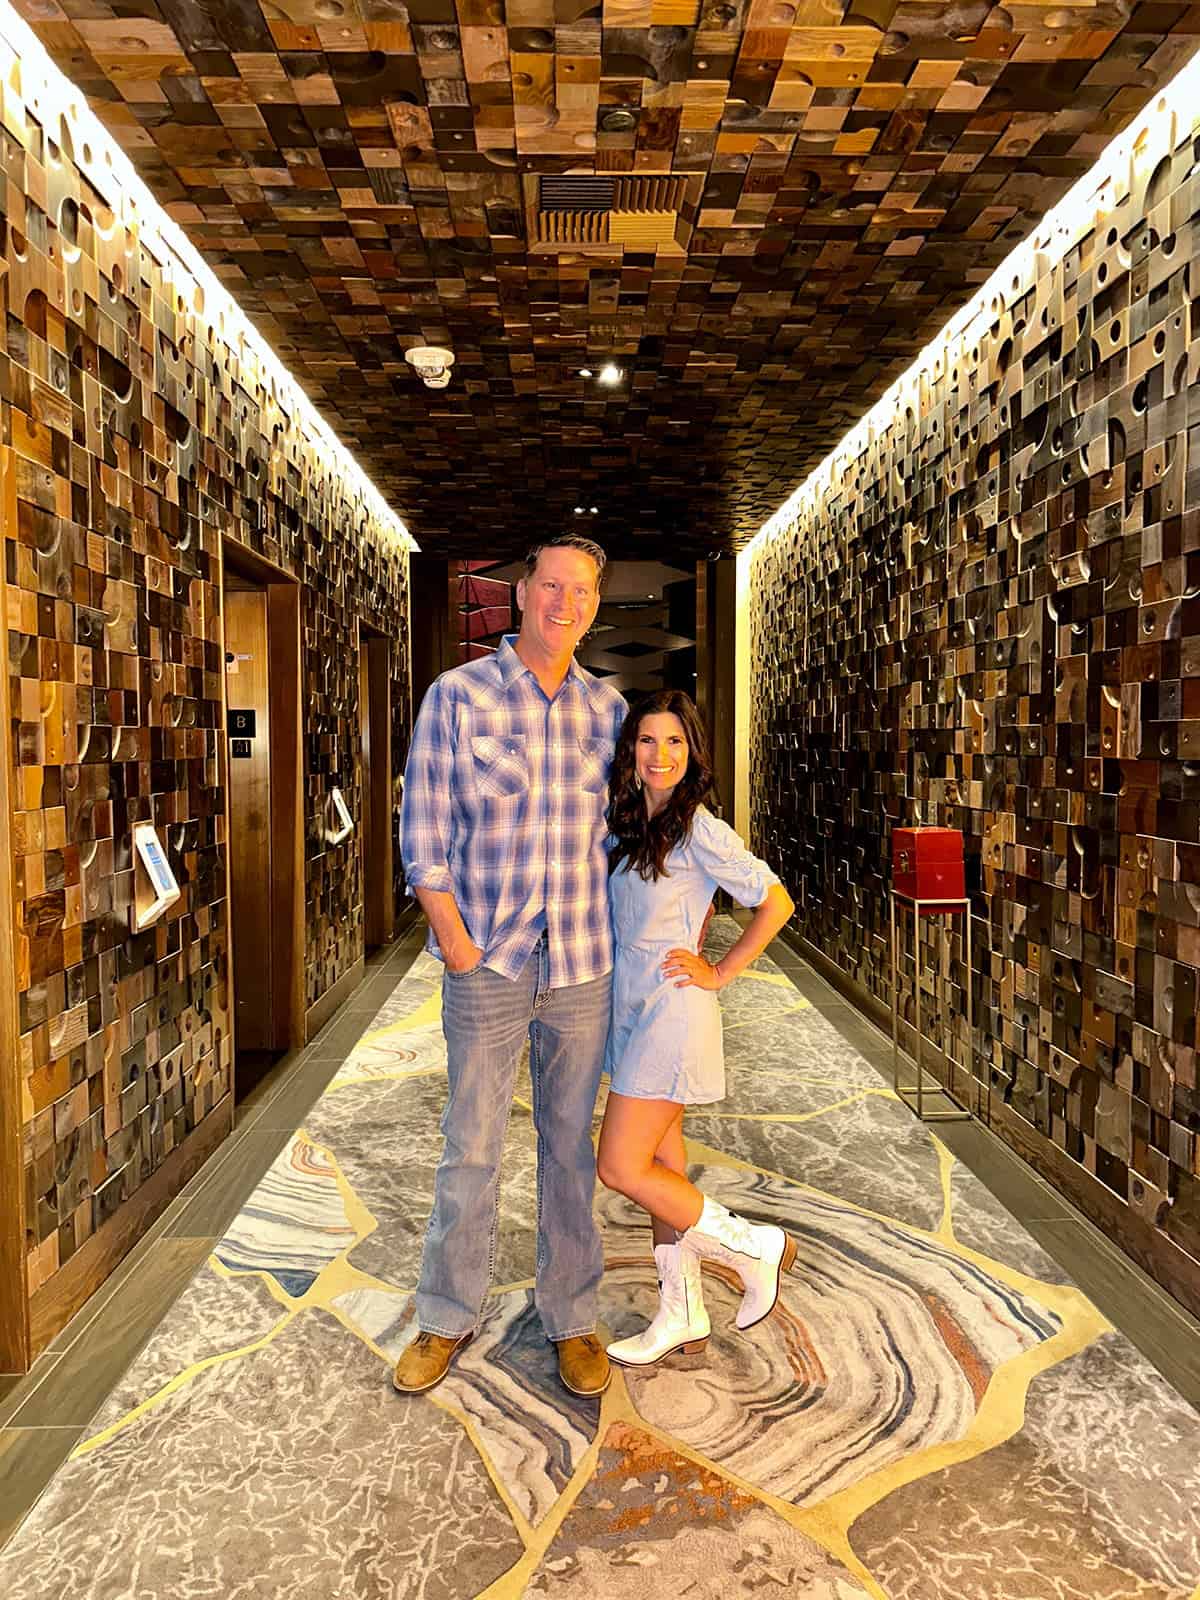 A man in plaid and a woman in a blue romper with white boots on standing in a hallway of bronze tiles.